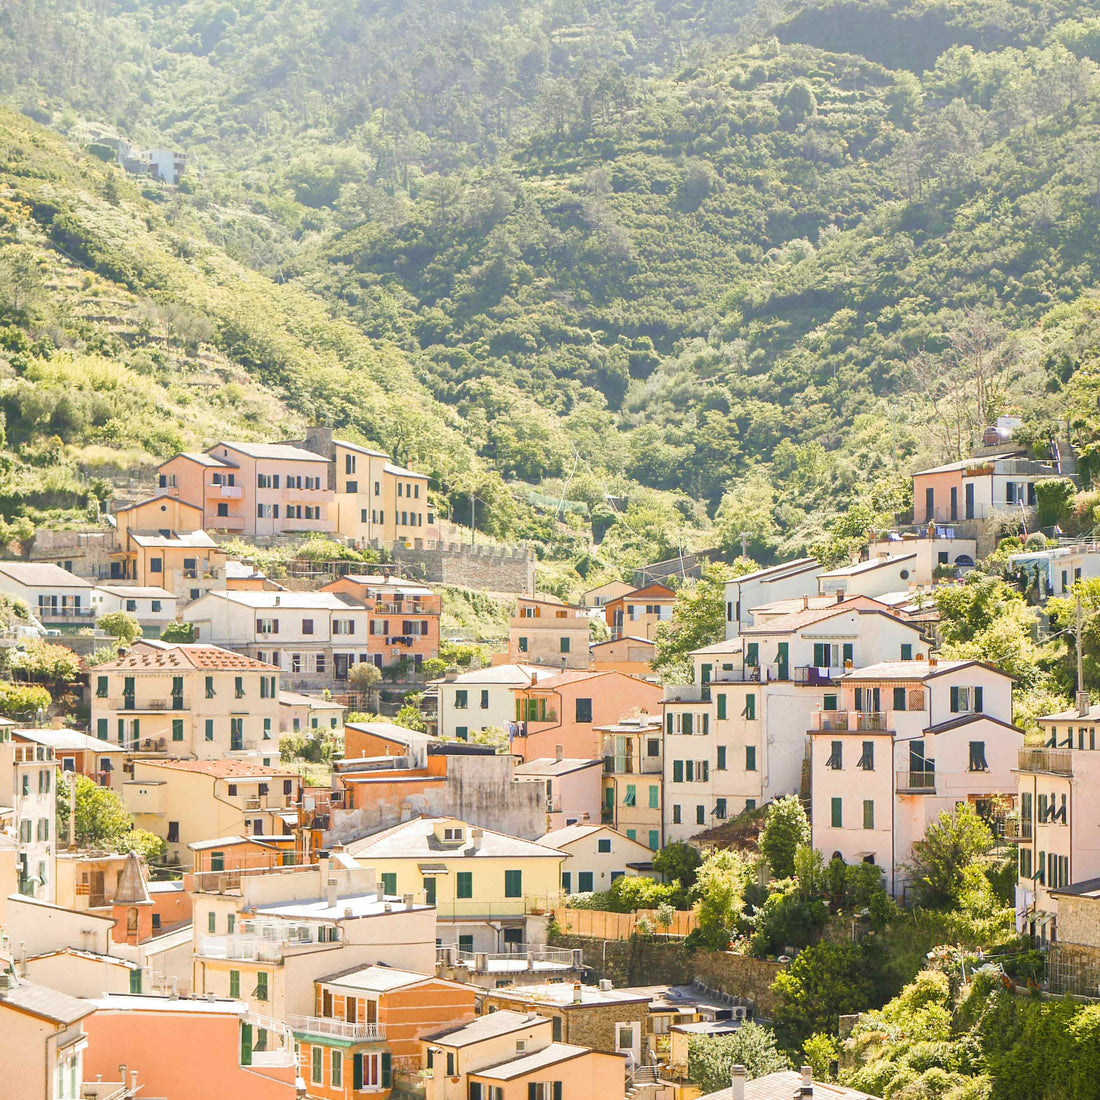 An Italian hill town with terracotta and ochre colored houses against a green landscape